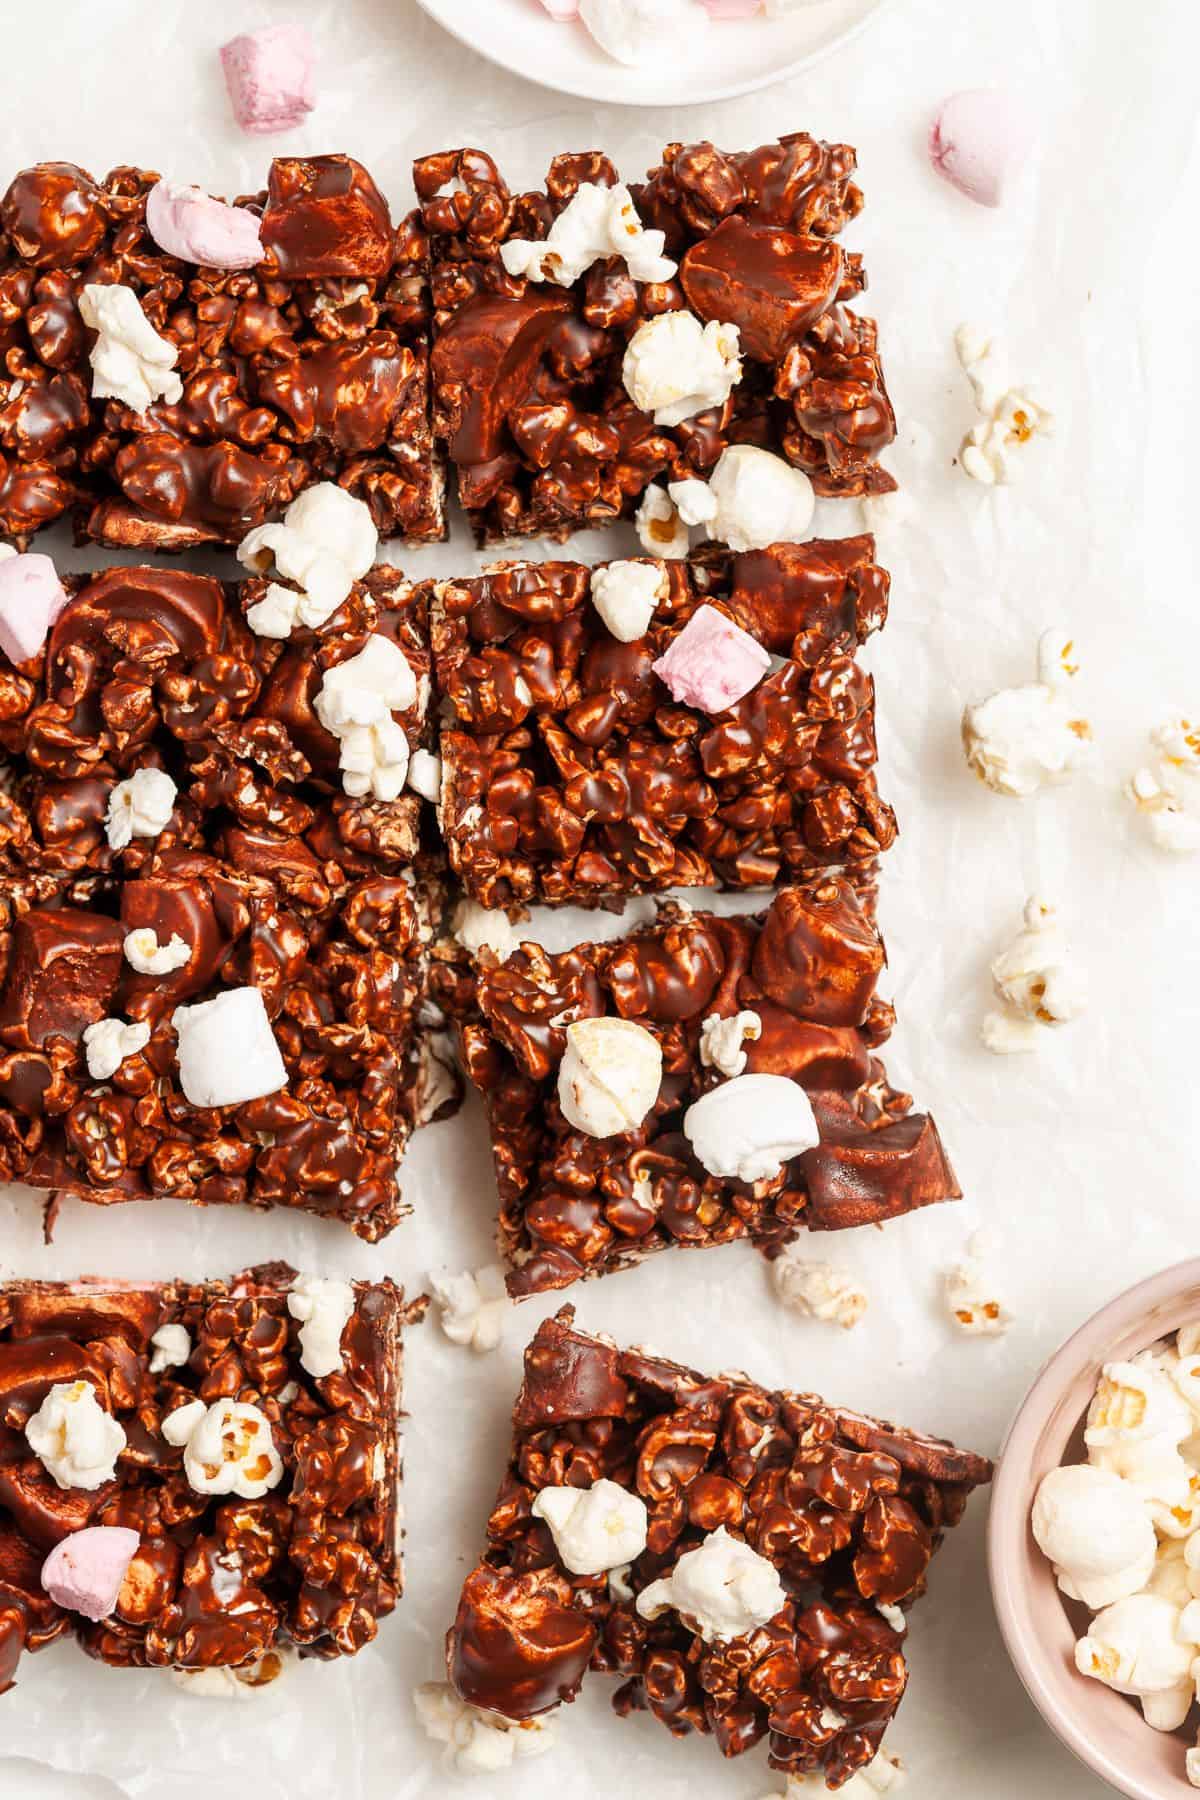 Eight cut squares of chocolate popcorn bars on some baking paper, with some popcorn scattered around the edges.